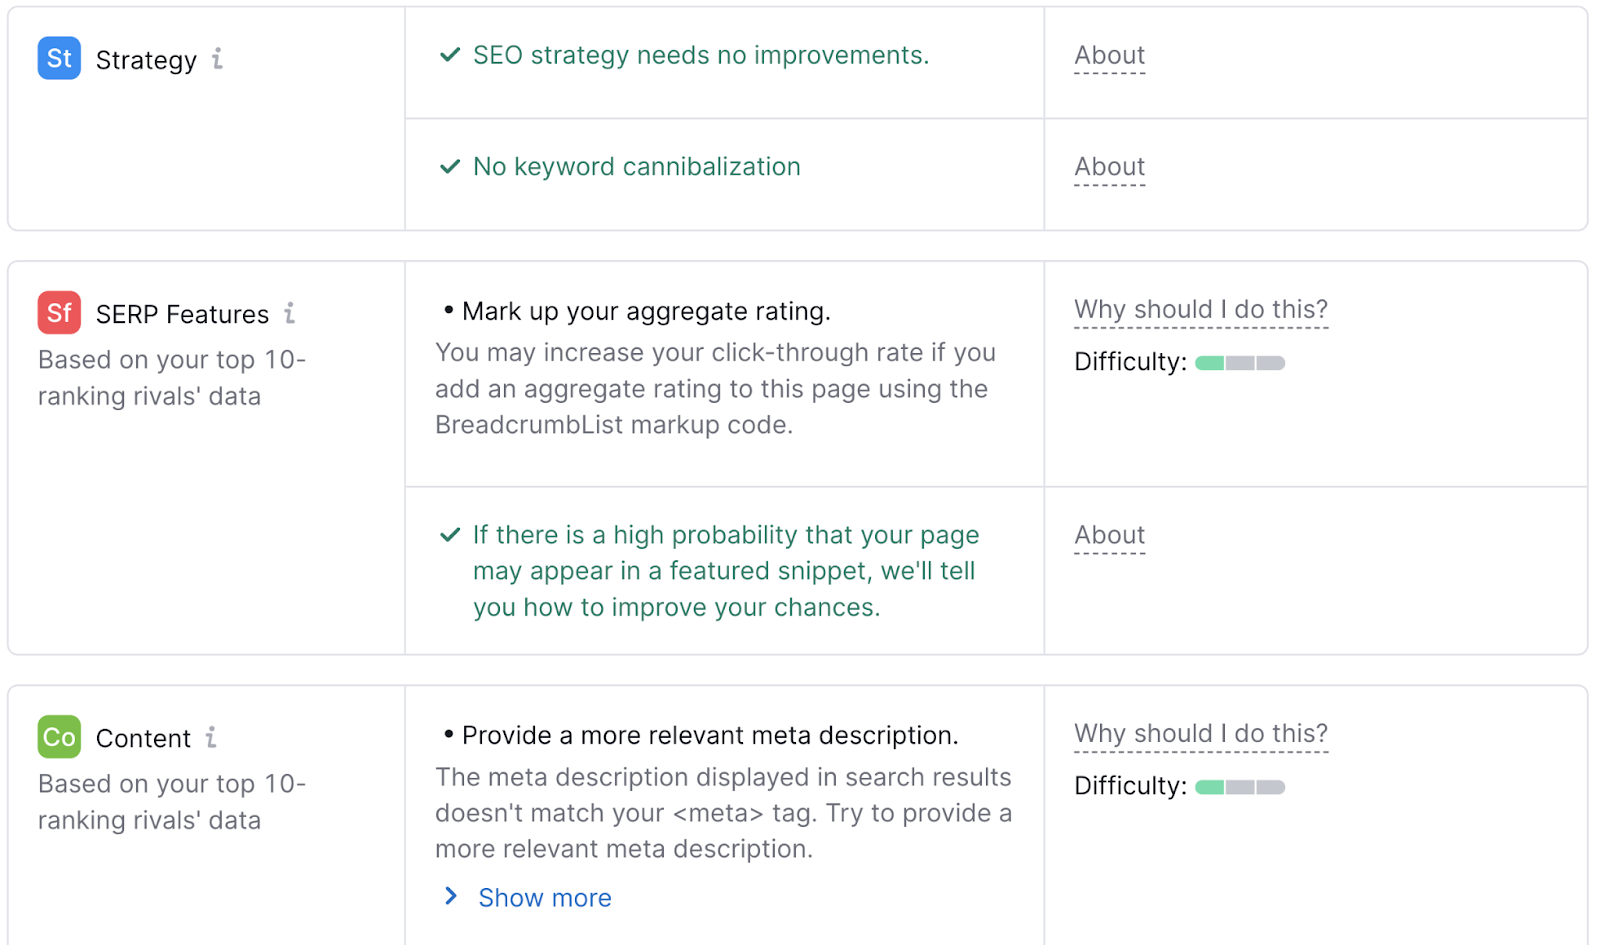 Optimization ideas divided by strategy, serp features and content sections in On-Page SEO Checker tool